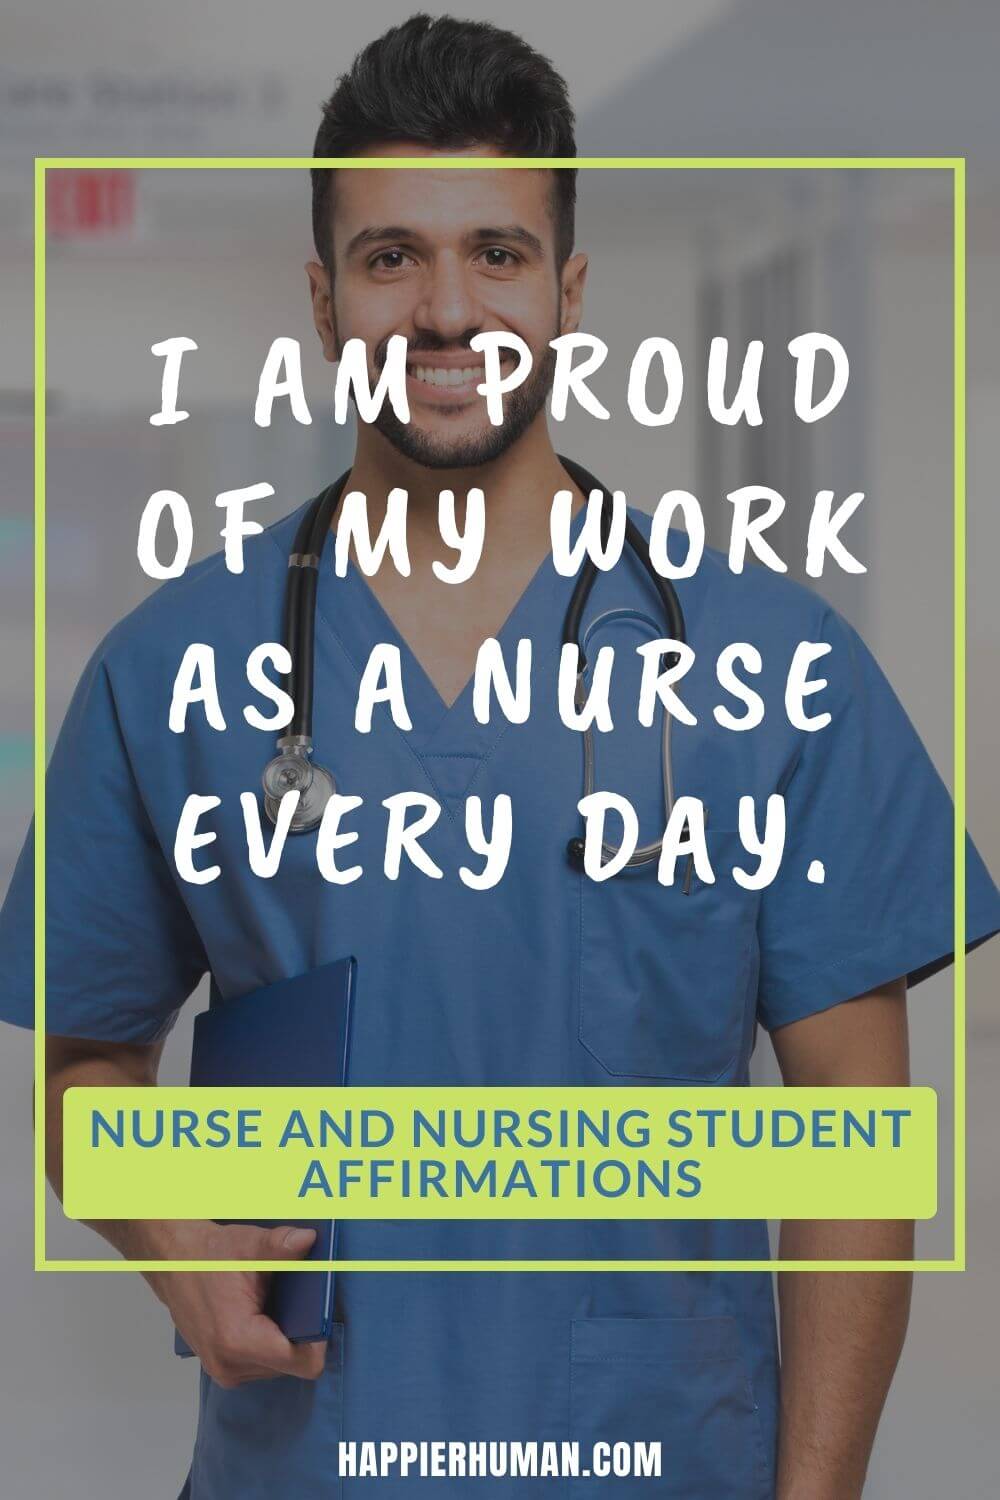 Nurse Affirmations - I am proud of my work as a nurse every day. | positive affirmations for health care workers | daily affirmations